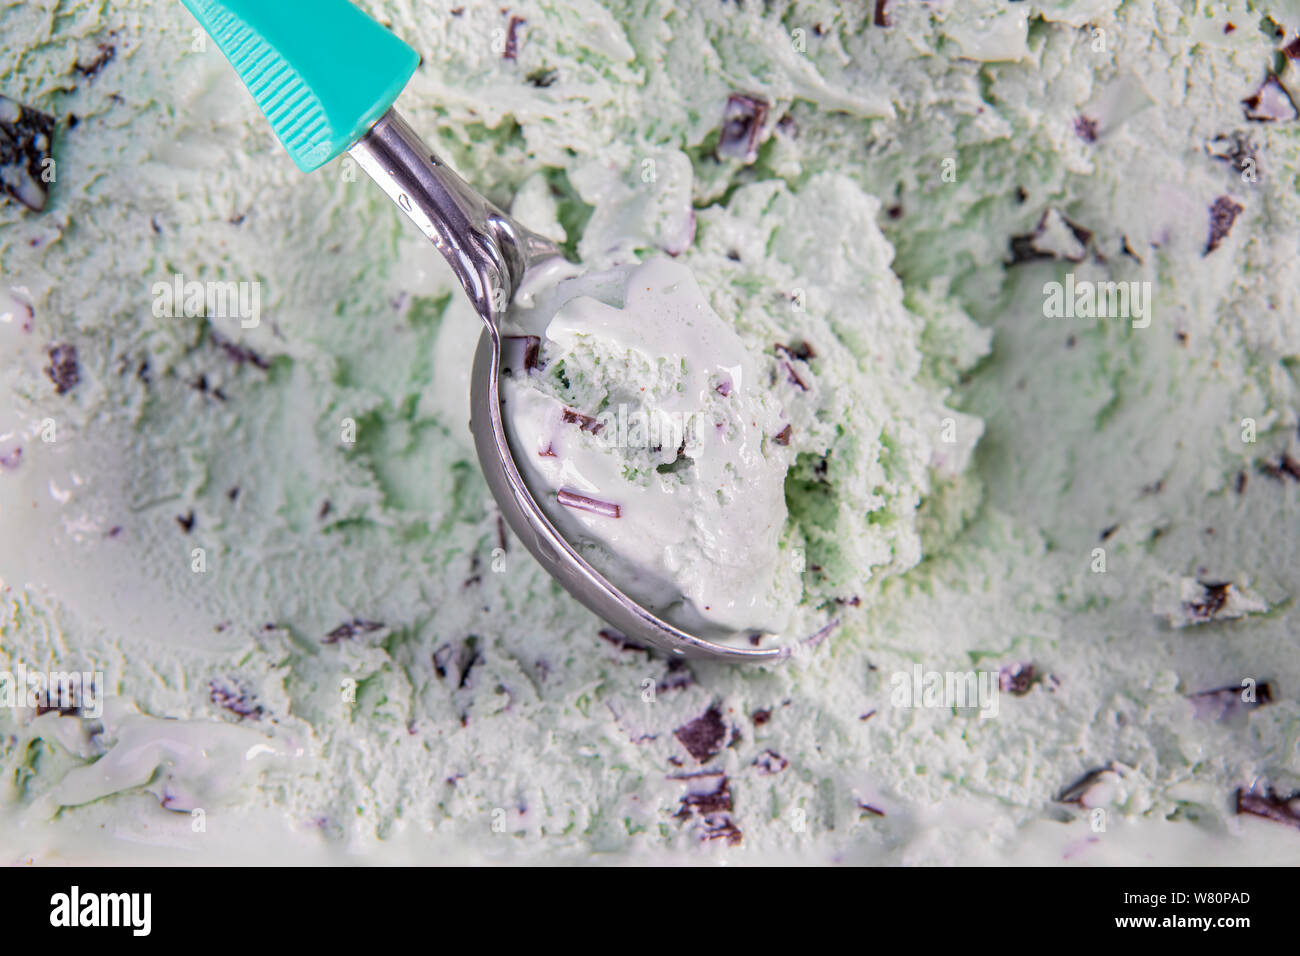 Top view of mint flavour ice cream with chocolate flakes in box. Focus on ice cream in scoop. Stock Photo